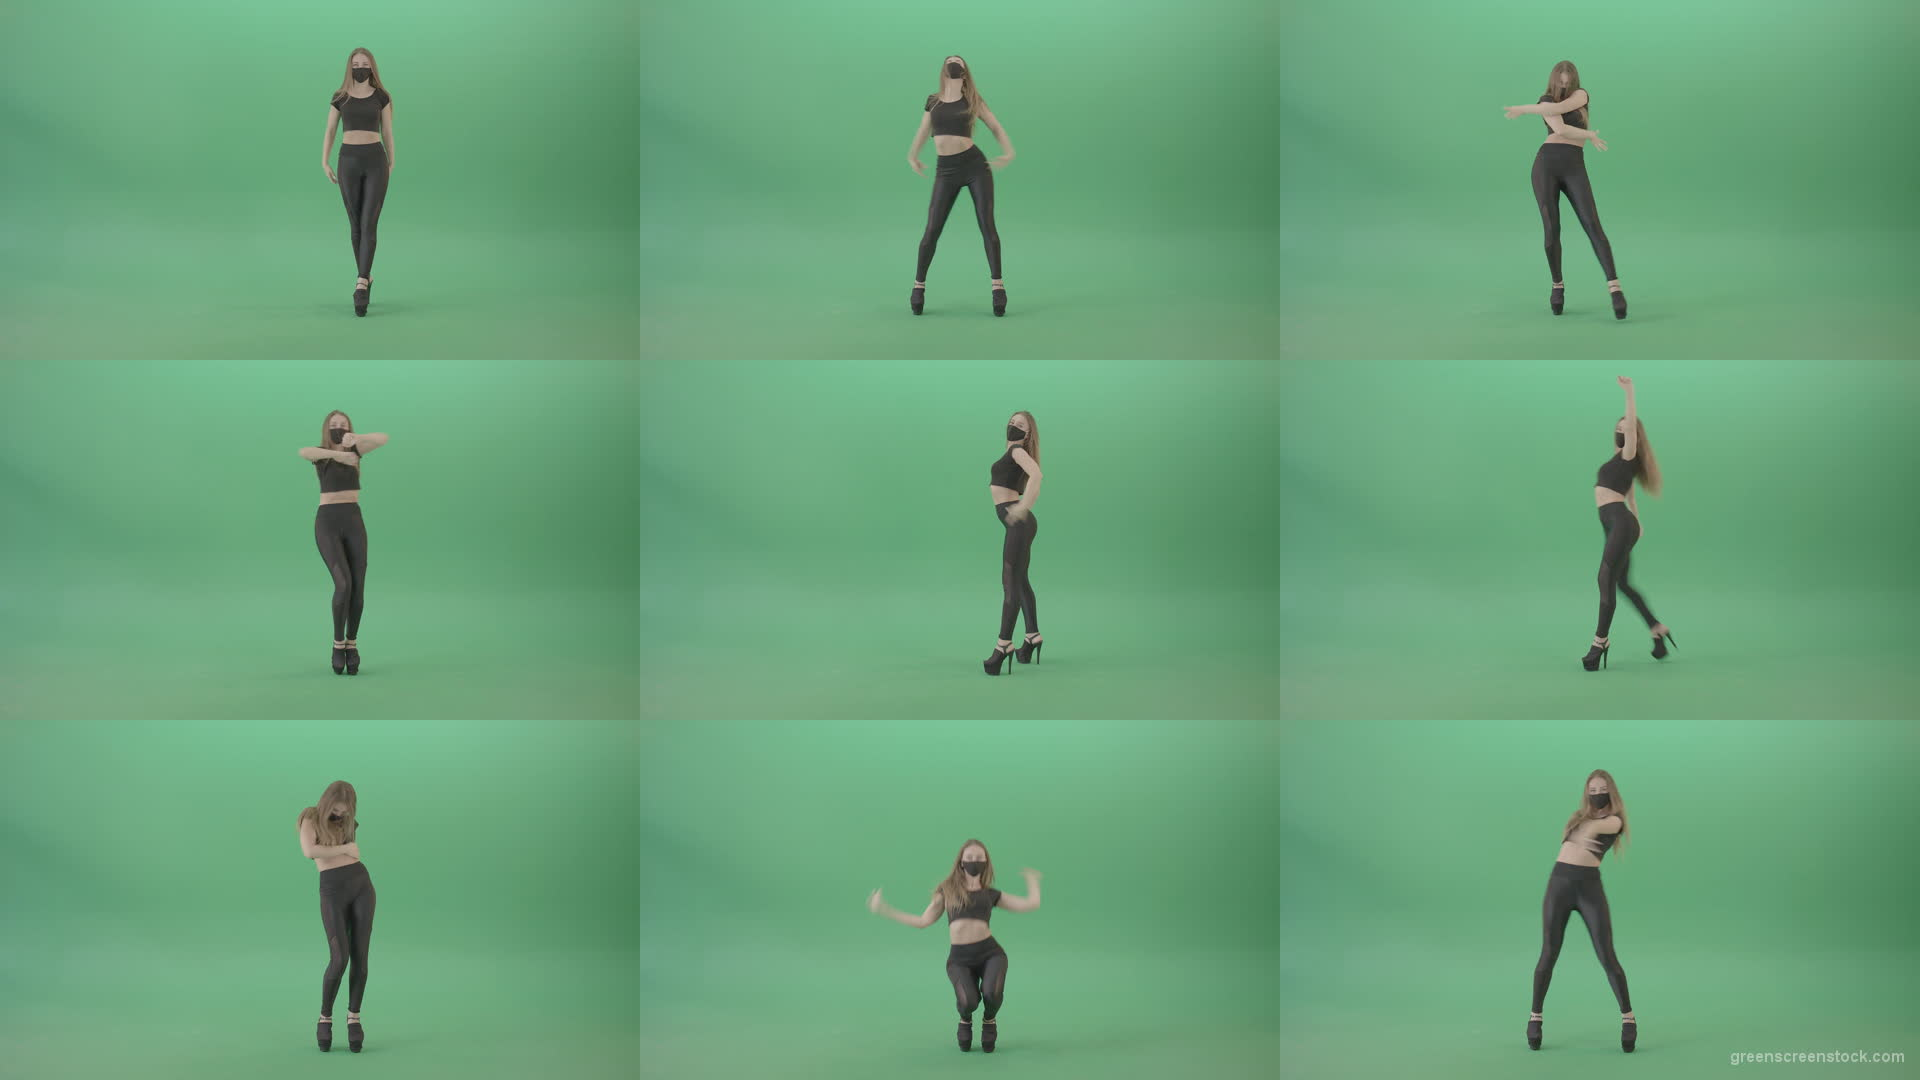 Sexy-girl-in-black-mask-and-costume-dancing-with-erotic-moves-isolated-on-green-screen-4K-video-footage-1920 Green Screen Stock